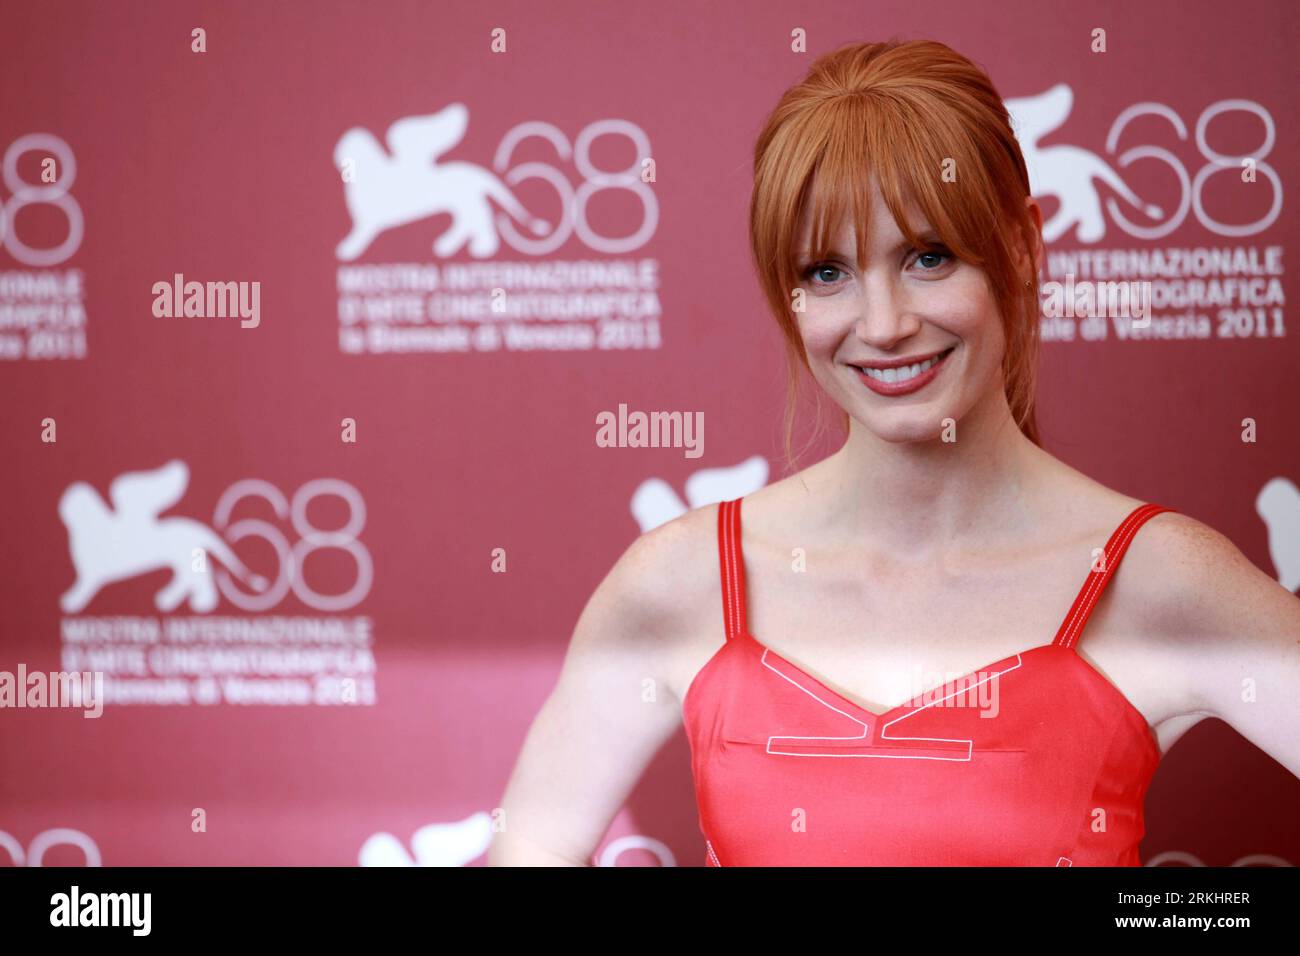 Bildnummer: 55892679  Datum: 04.09.2011  Copyright: imago/Xinhua (110904) -- VENICE, Sept. 4, 2011 (Xinhua) -- Actress Jessica Chastain poses during the photo-call for AlPacino s new film Wilde Salome at the 68th Venice International Film Festival in Venice, Italy, Sept. 4, 2011. (Xinhua/Huang Xiaozhe) (nxl) ITALY-VENICE-FILM FESTIVAL-AL PACINO- WILDE SALOME PUBLICATIONxNOTxINxCHN People Film Entertainment Kultur Filmfestival 68 Venedig Photocall Porträt x0x xtm premiumd 2011 quer     55892679 Date 04 09 2011 Copyright Imago XINHUA  Venice Sept 4 2011 XINHUA actress Jessica Chastain Poses duri Stock Photo